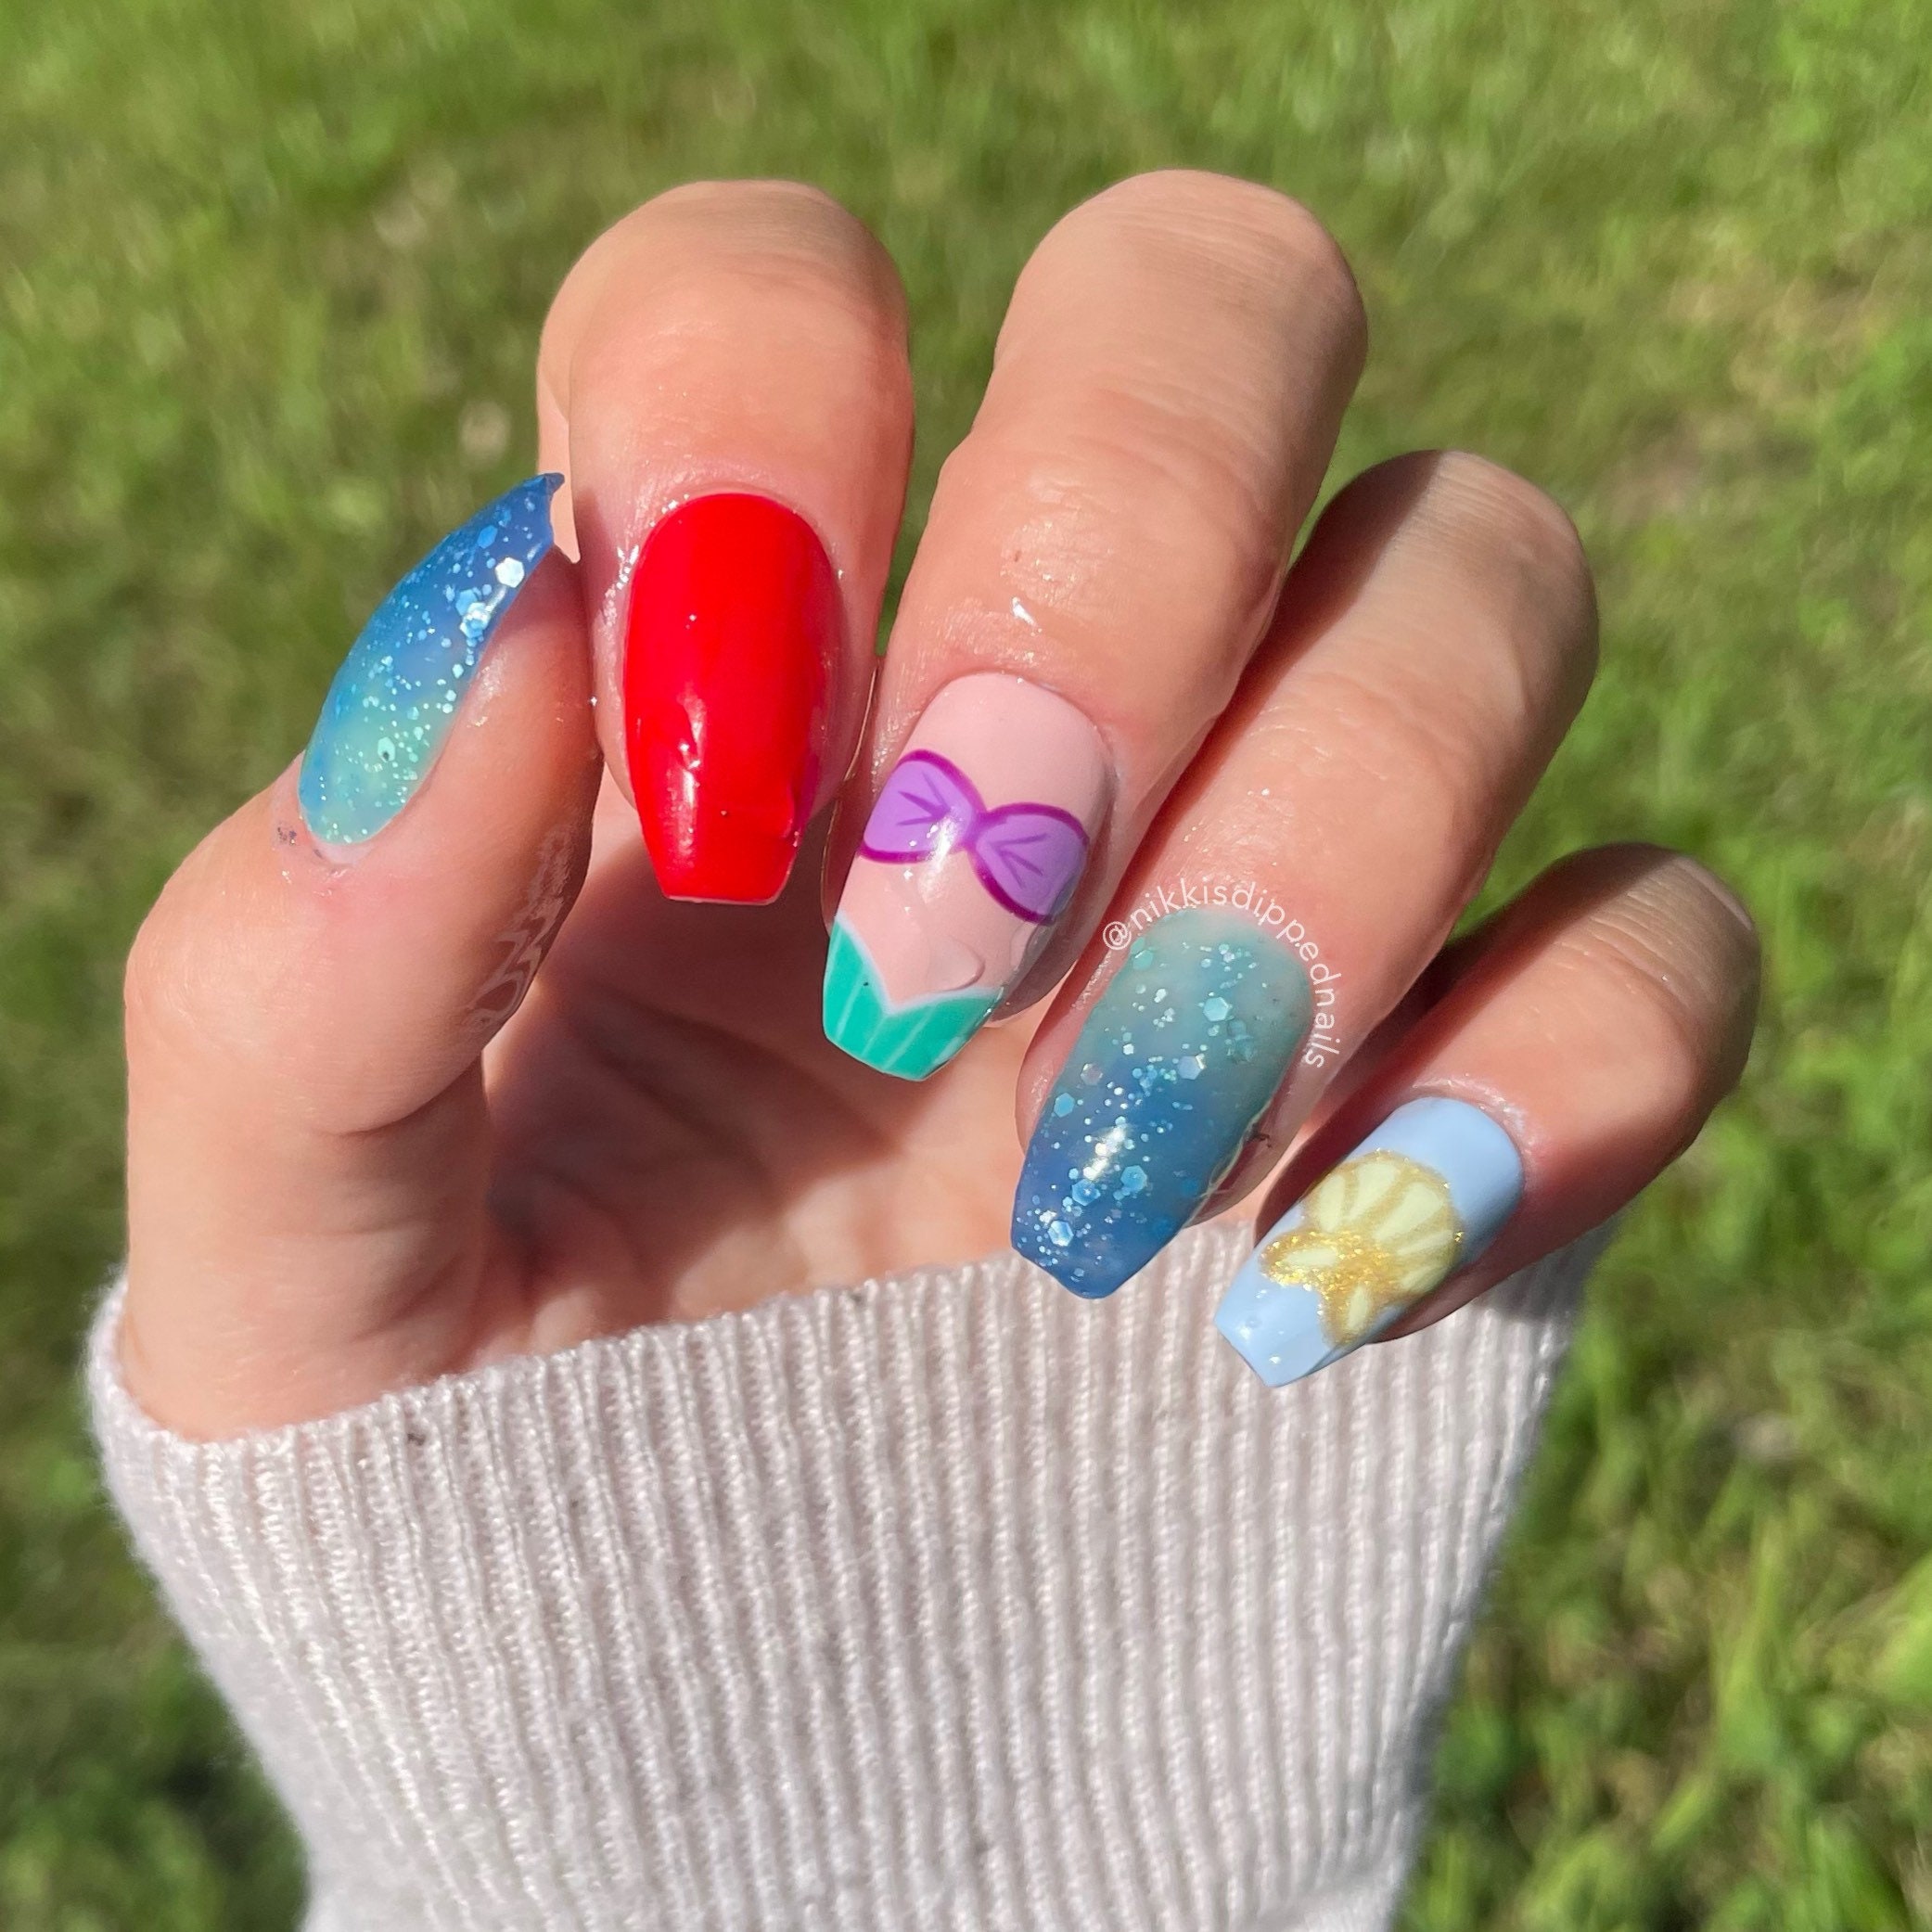 Mermaid Nails Are Trending Right Now—11 Chic Designs to Try | Who What Wear